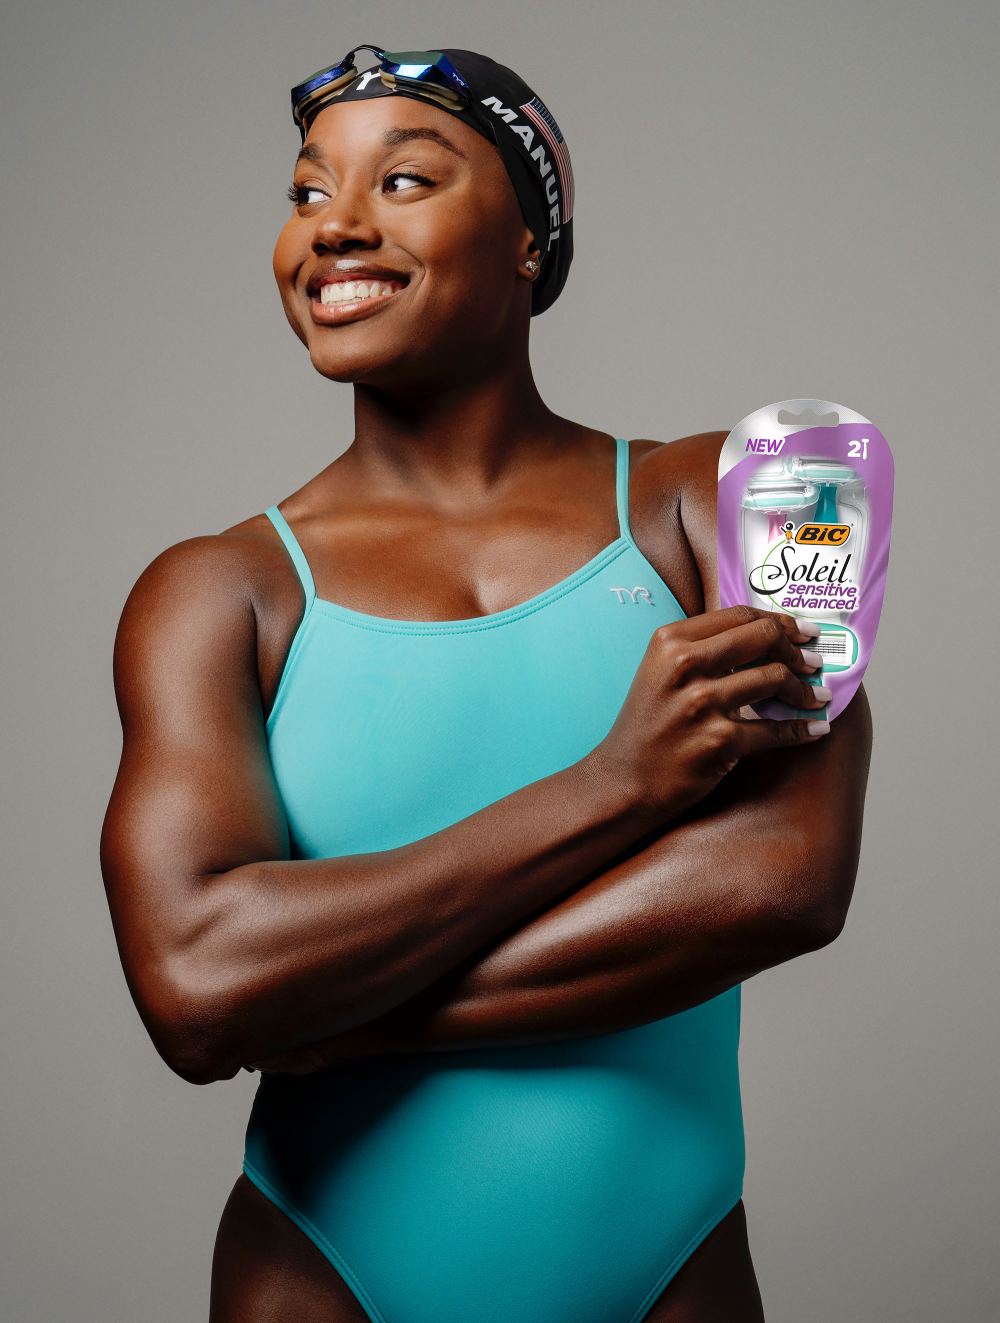 How Olympic Swimmer Simone Manuel Gets Her Legs So Smooth